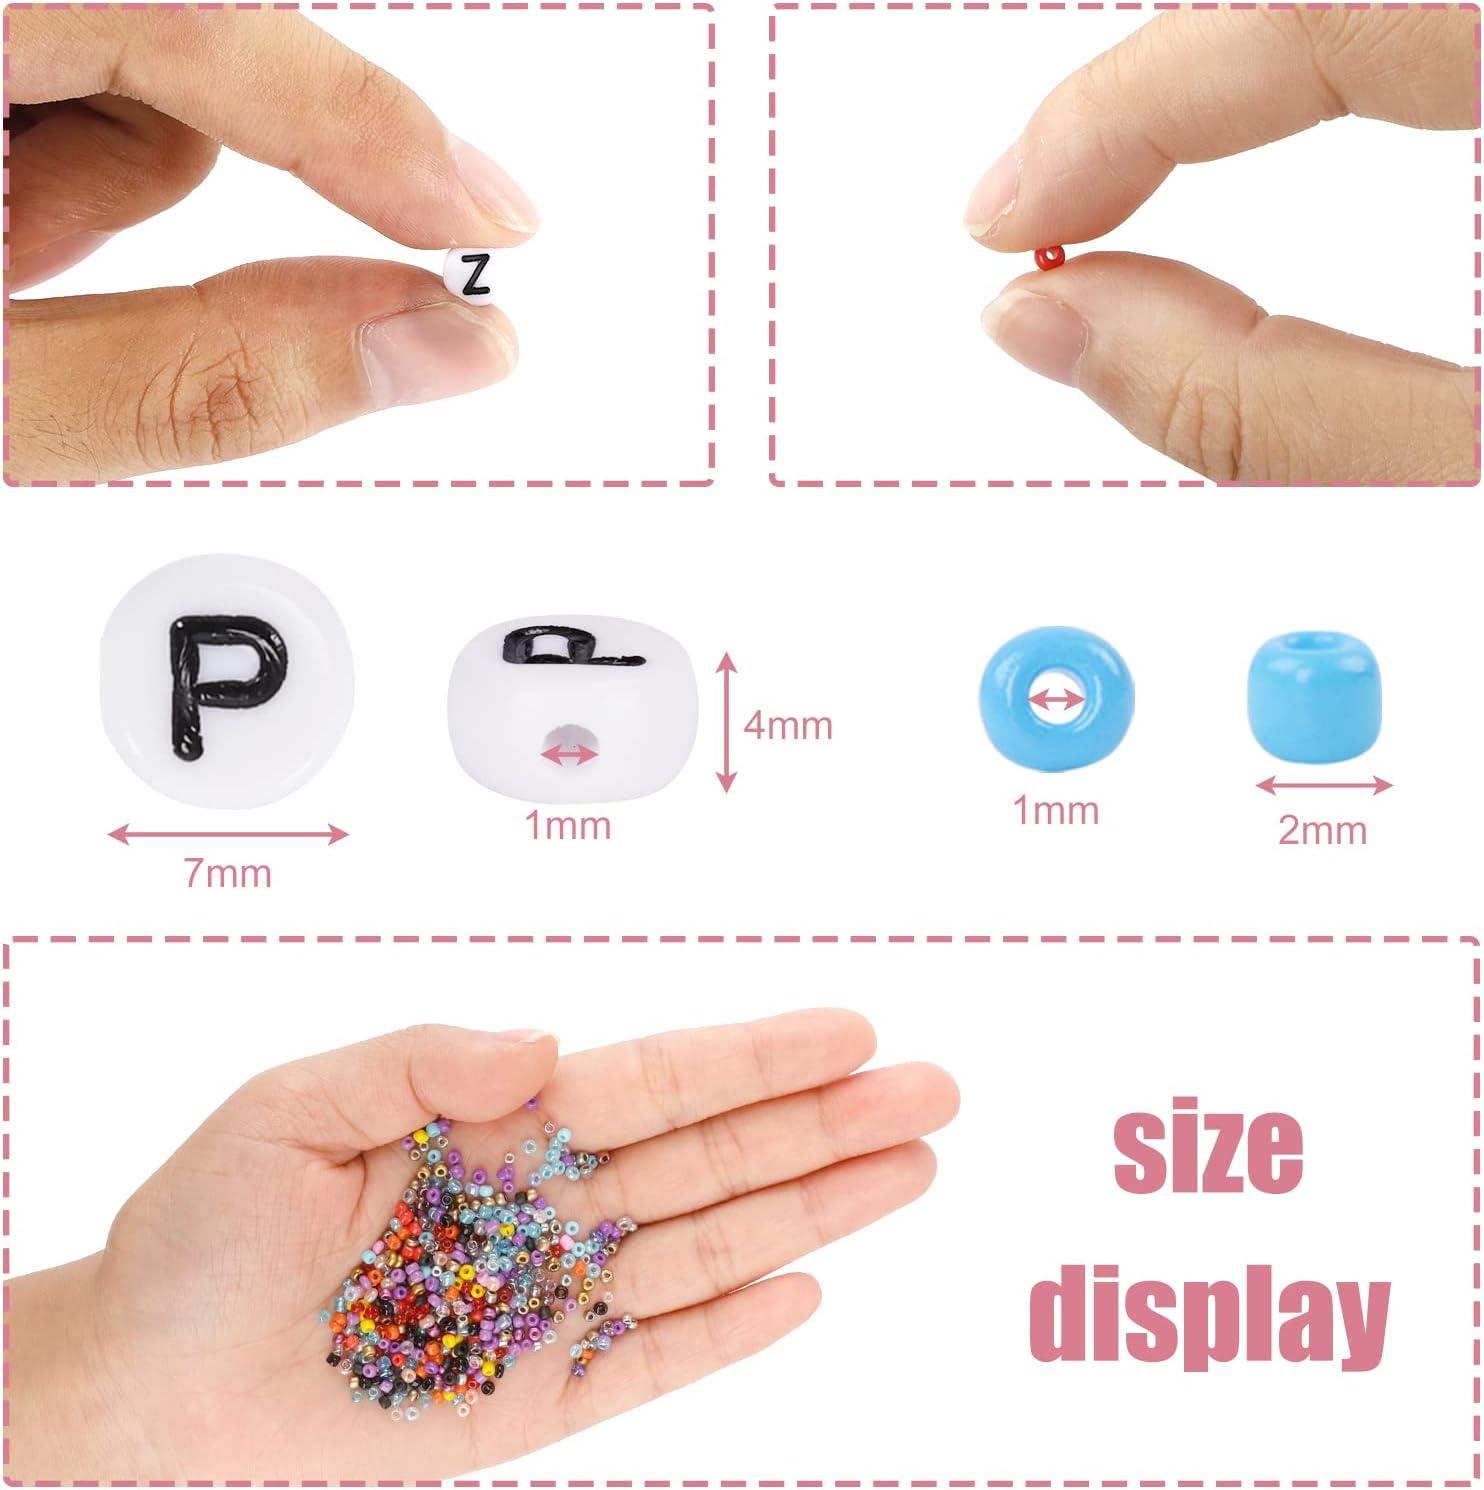  35000Pcs Glass Seed Beads, WOHOOW 2mm 48 Colors 12/0 Beads for  Jewelry Making Kit, Small Glass Bead Craft Set 200Pcs Alphabet Beads and  60Pcs Smiley Beads for Bracelets Earrings Ring Necklaces